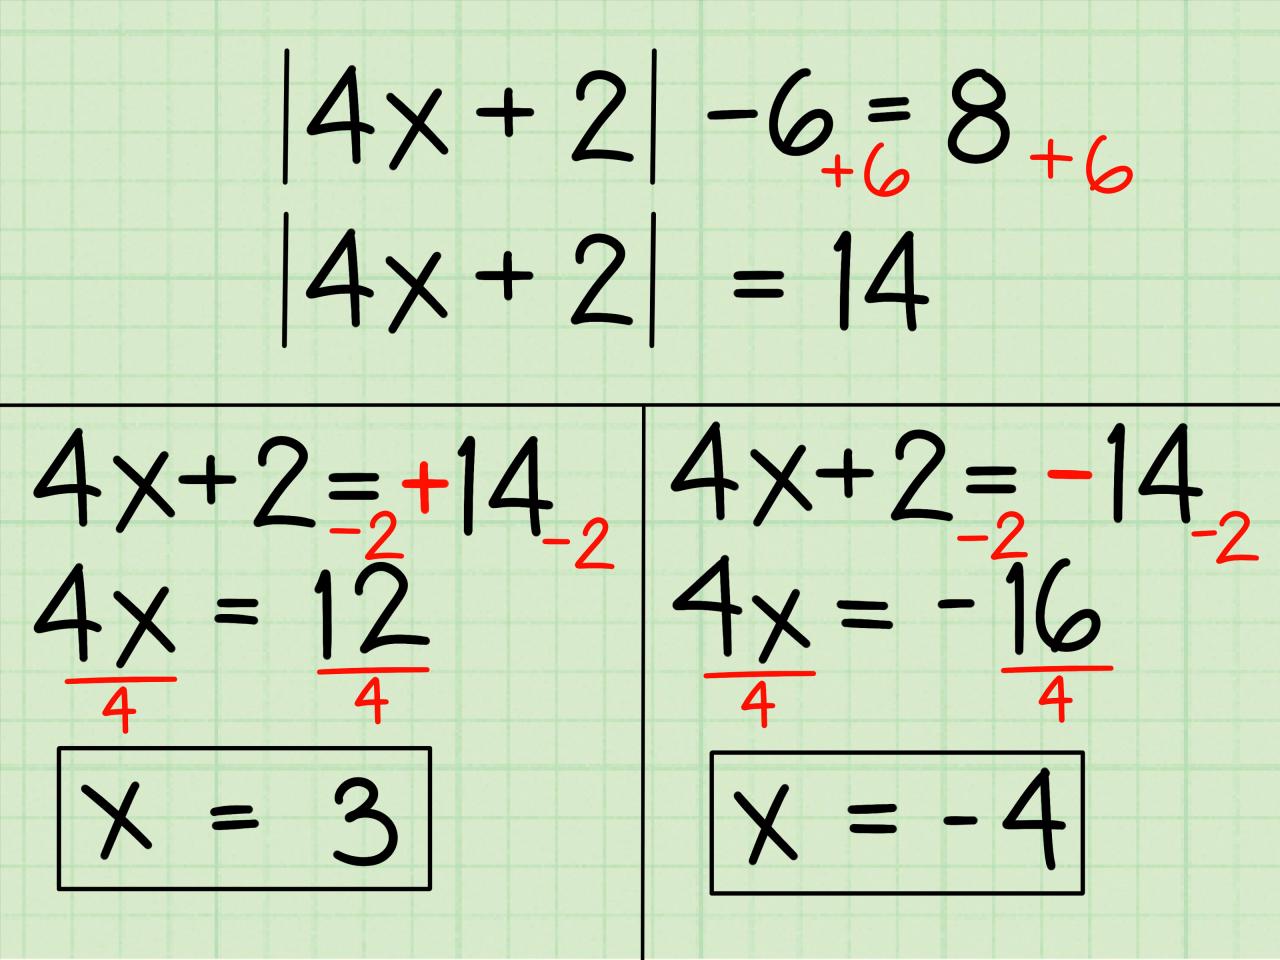 Write A Two Step Equation Involving Division And Addition That Has